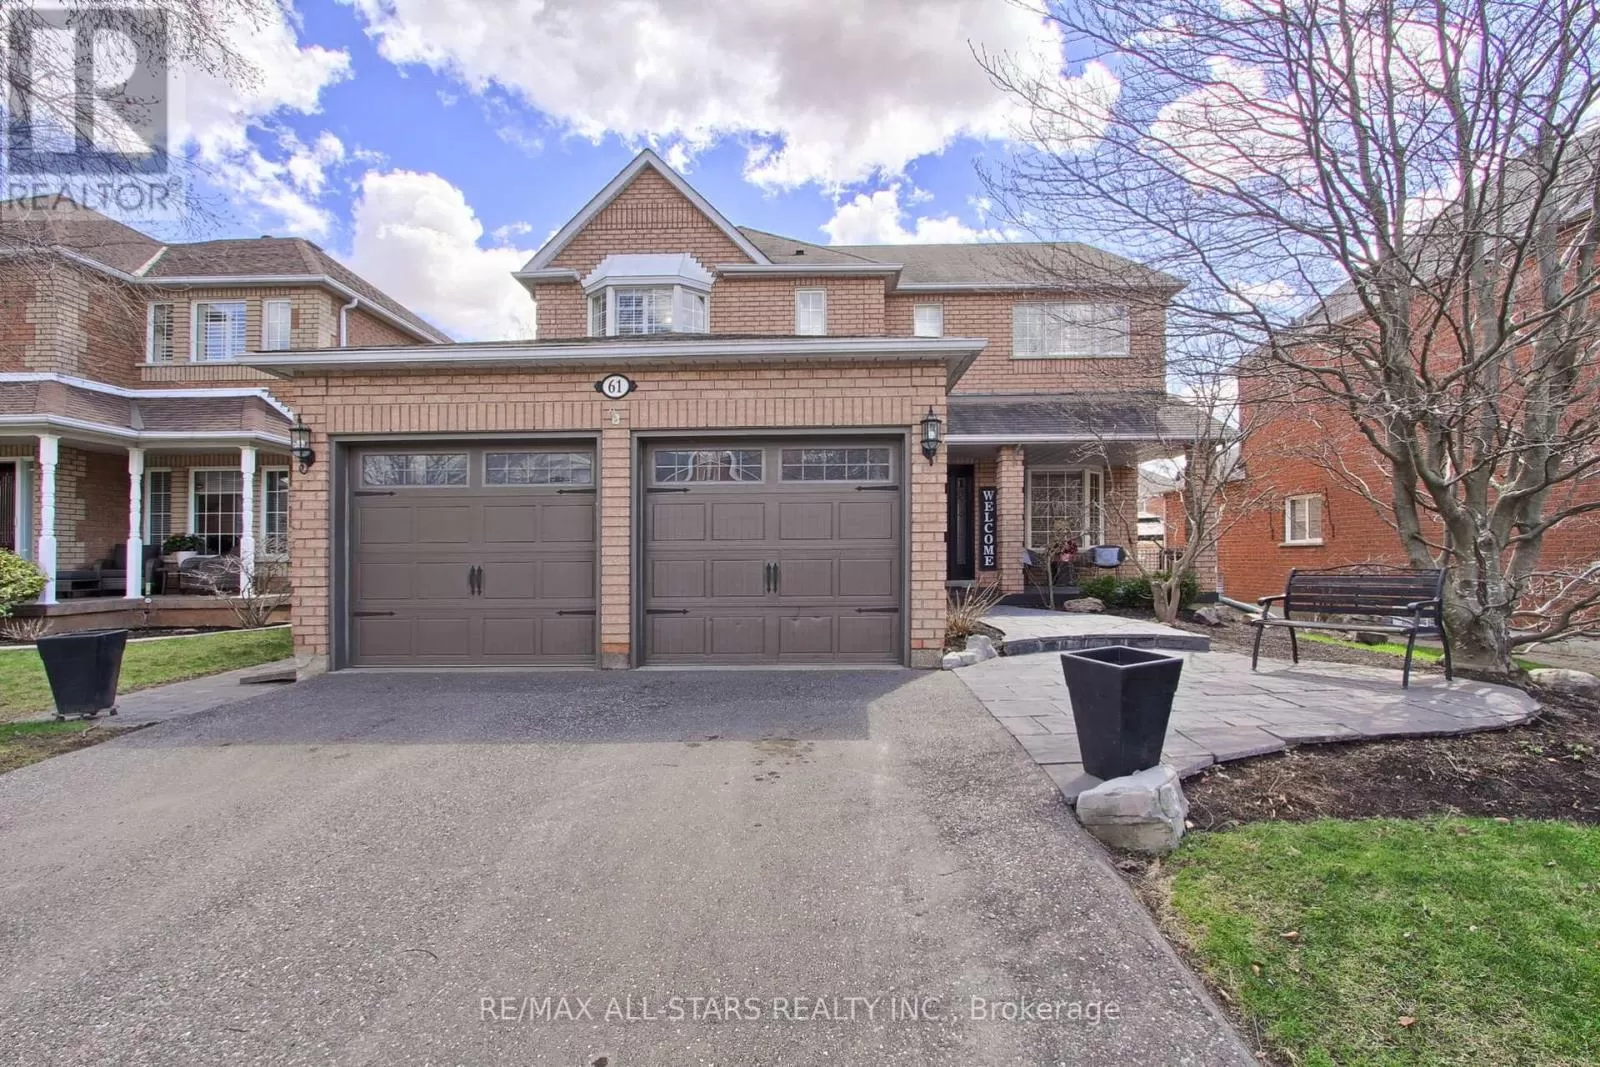 House for rent: 61 Jacob Way, Whitchurch-Stouffville, Ontario L4A 1K8